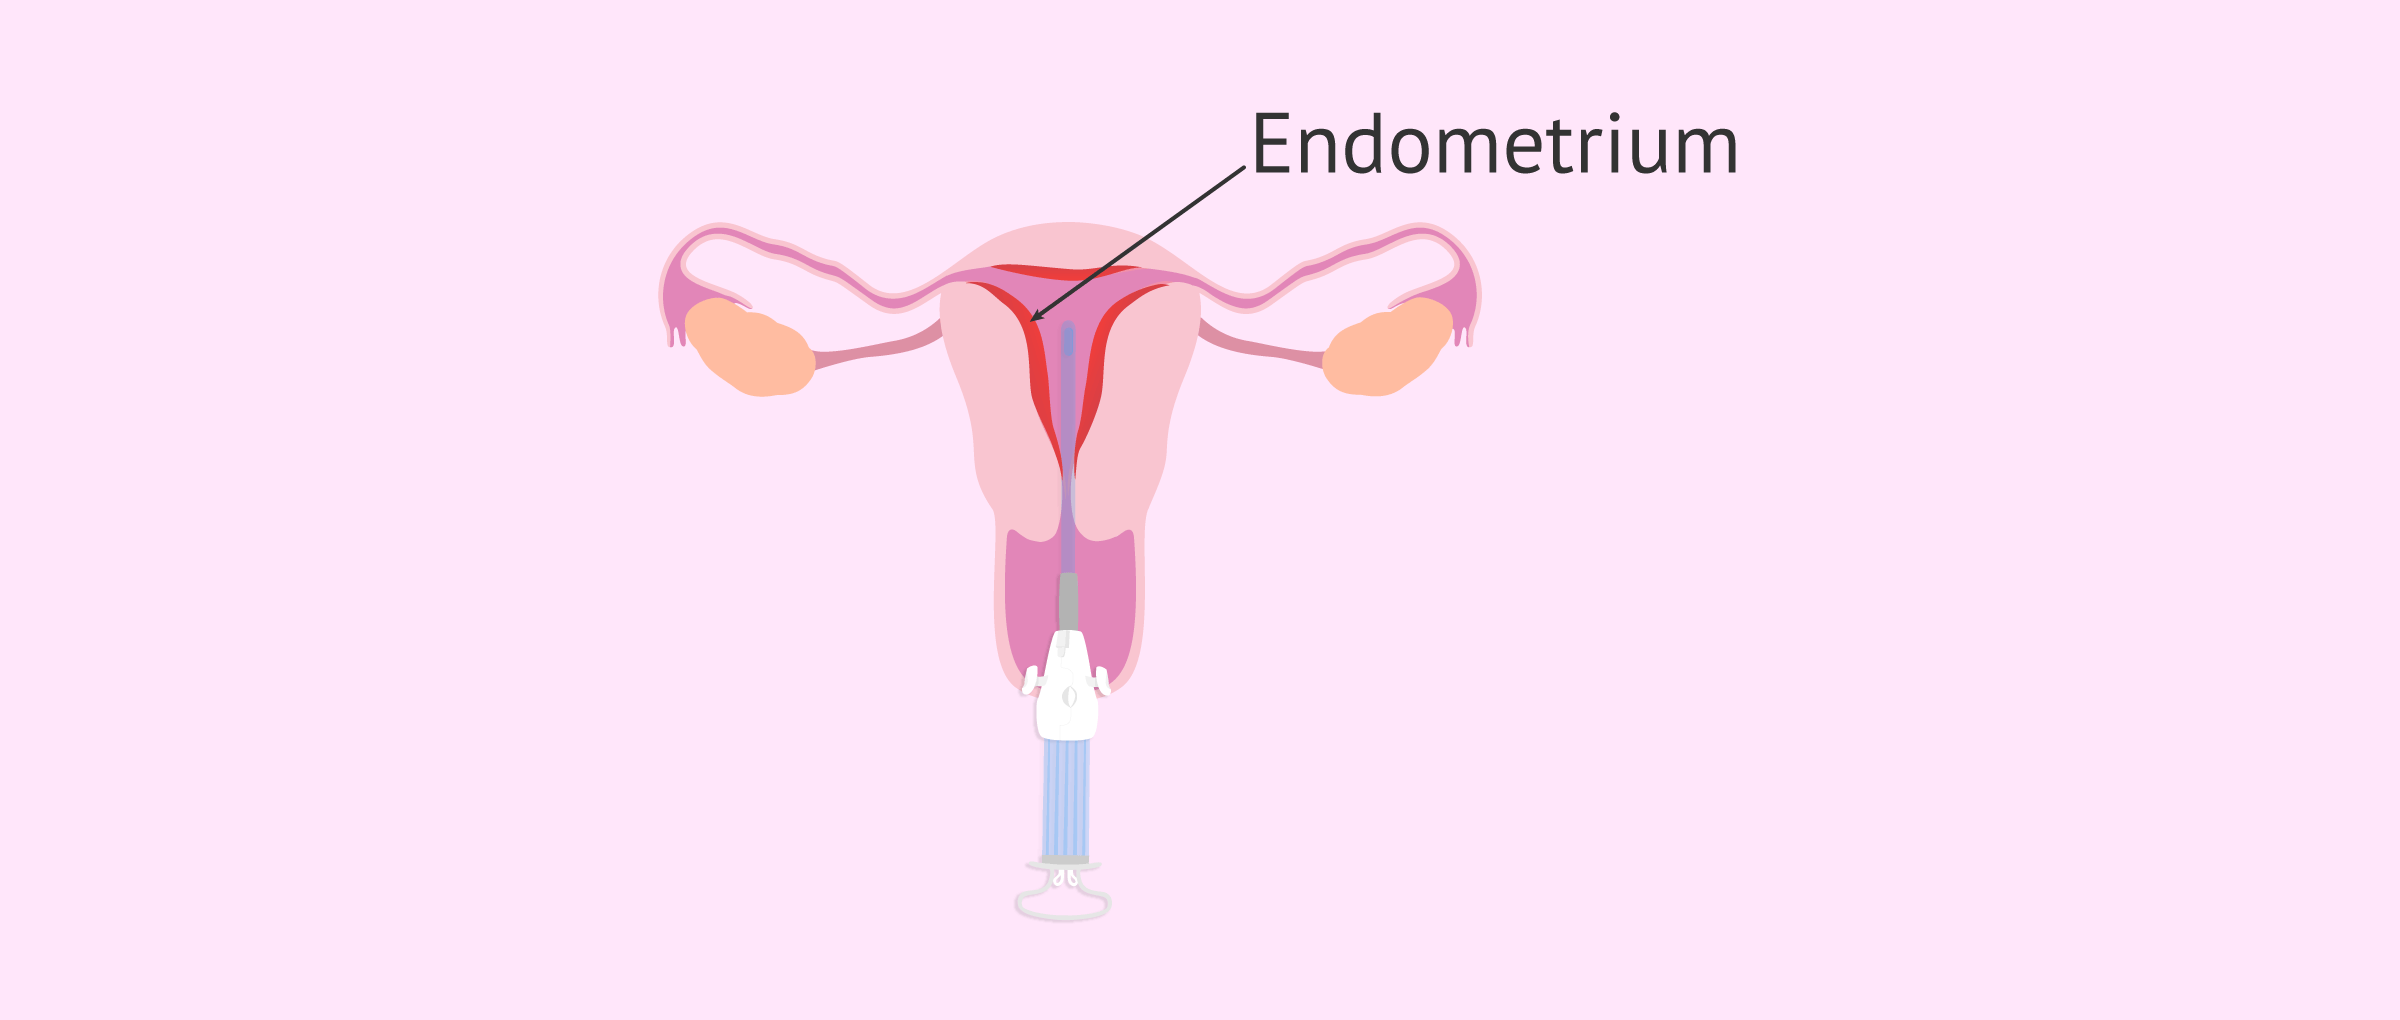 Curettage or scratching of the endometrium